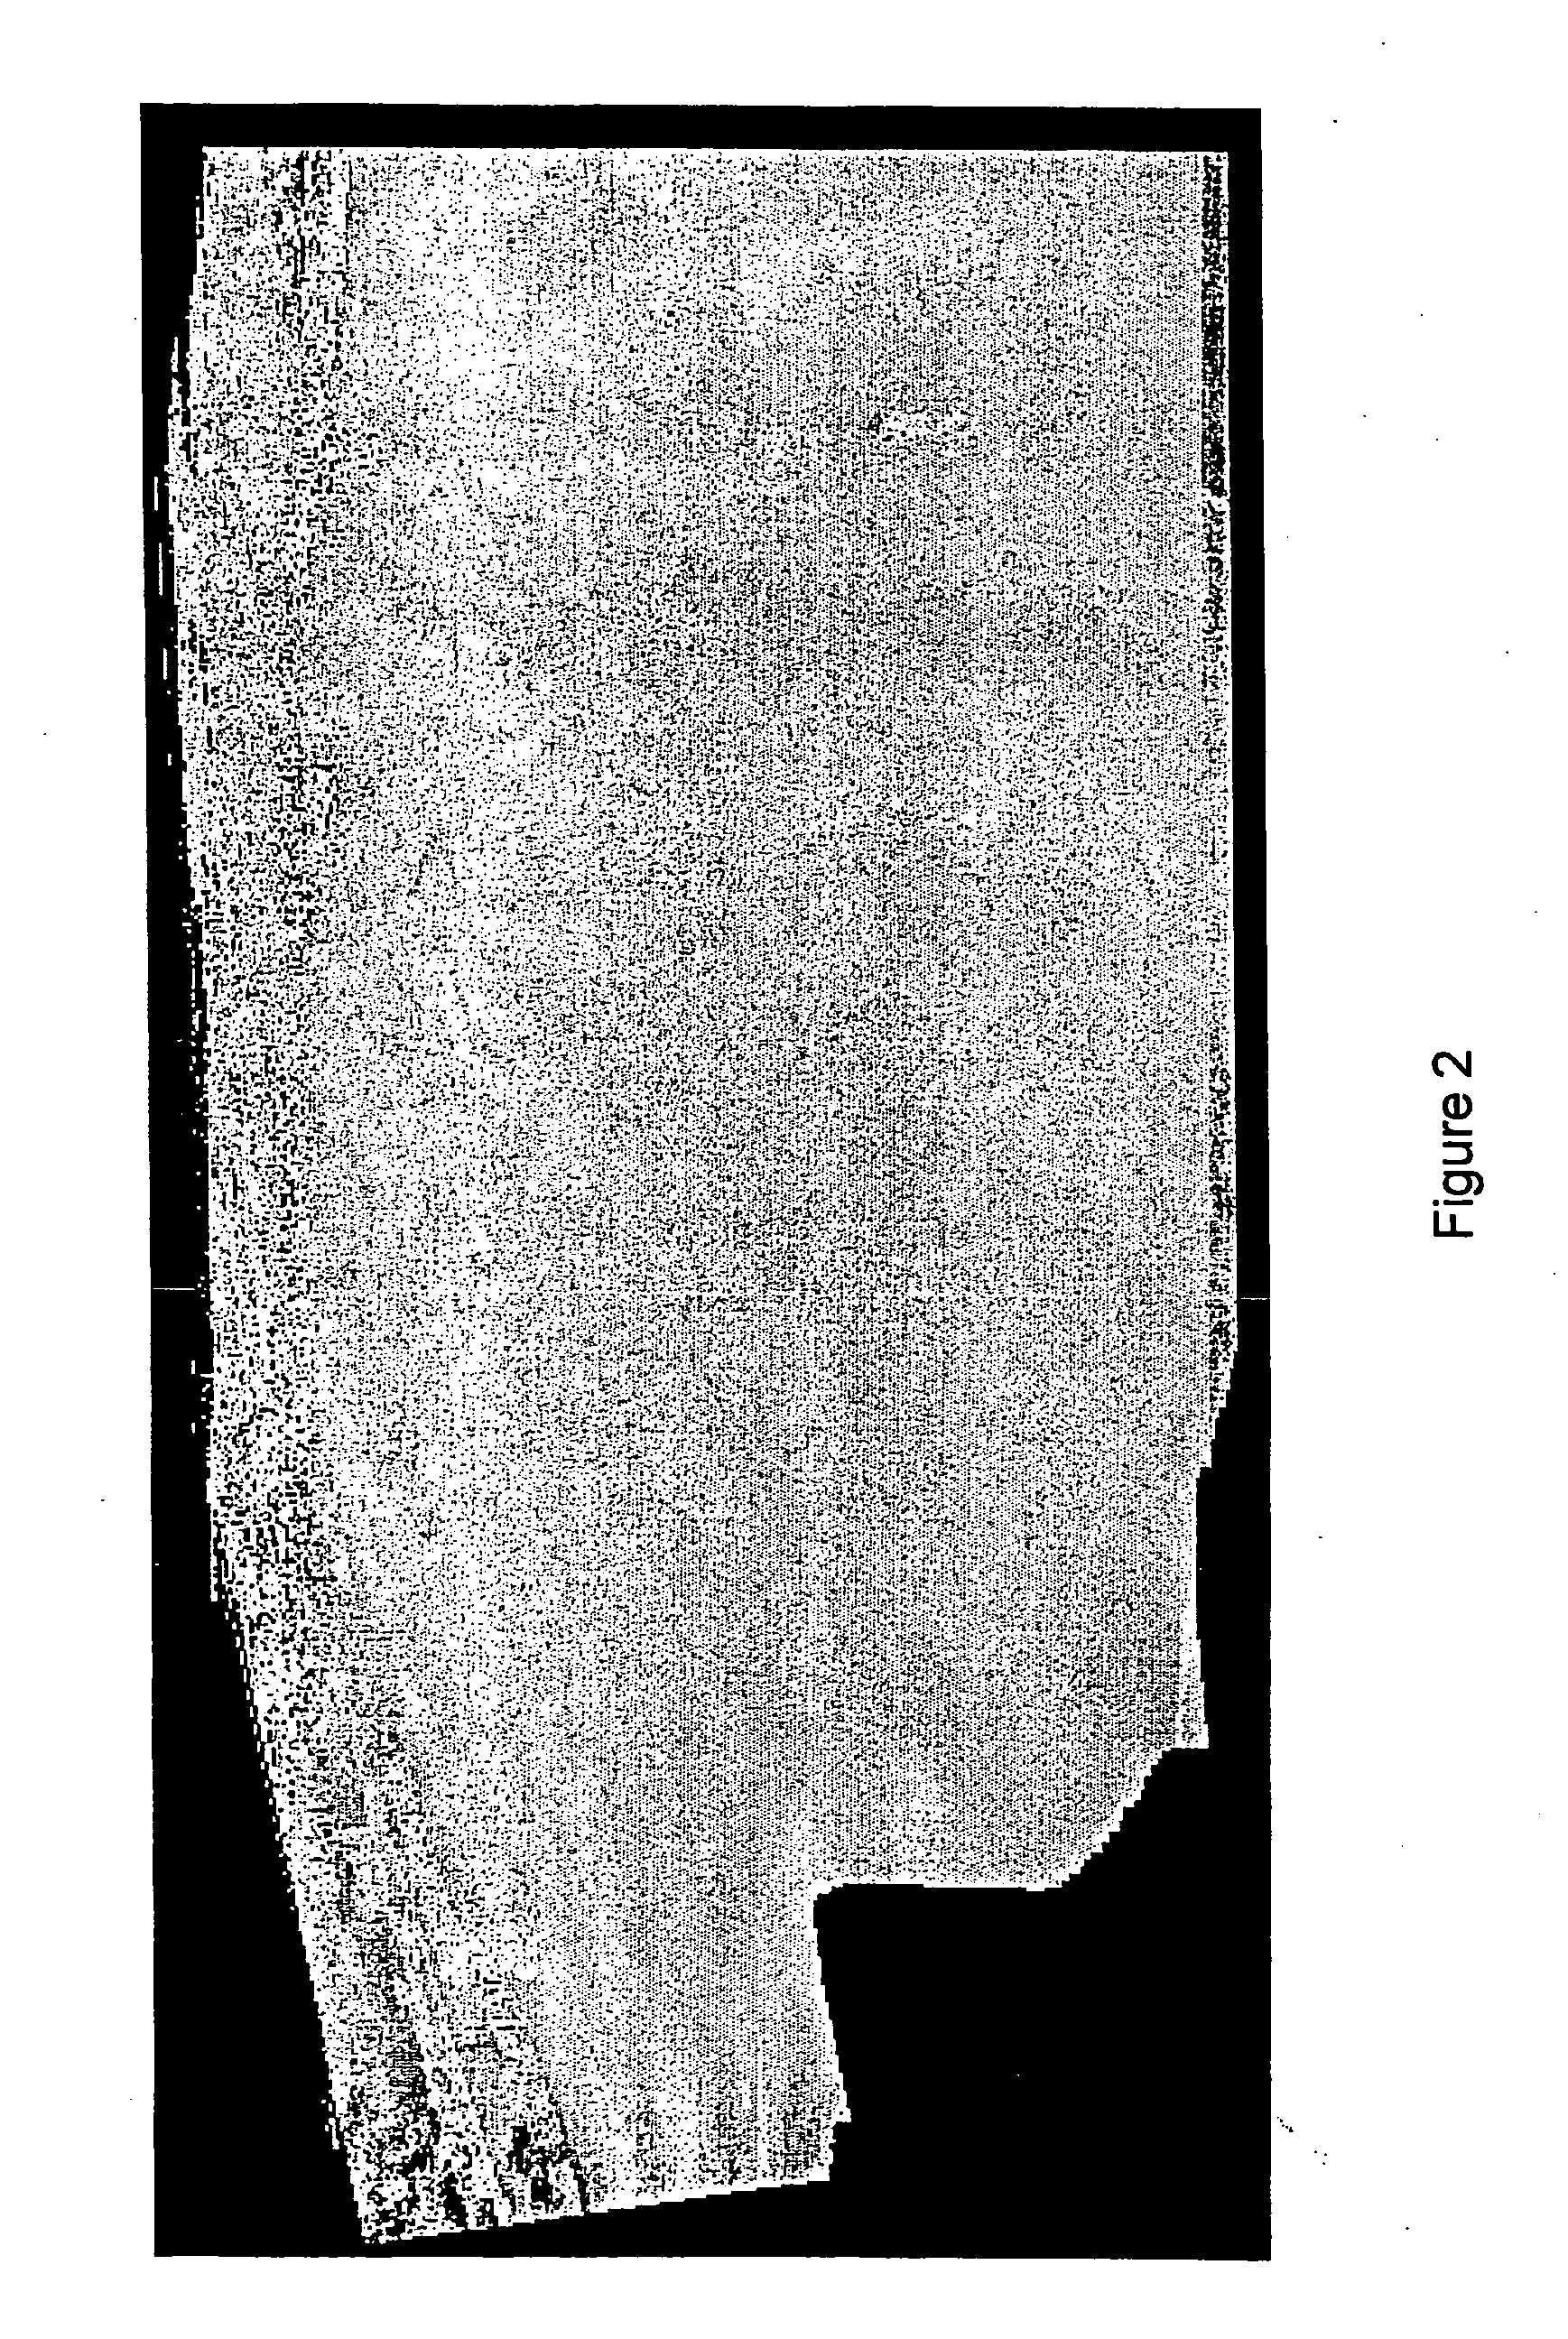 Method and system for generating panoramic images from video sequences